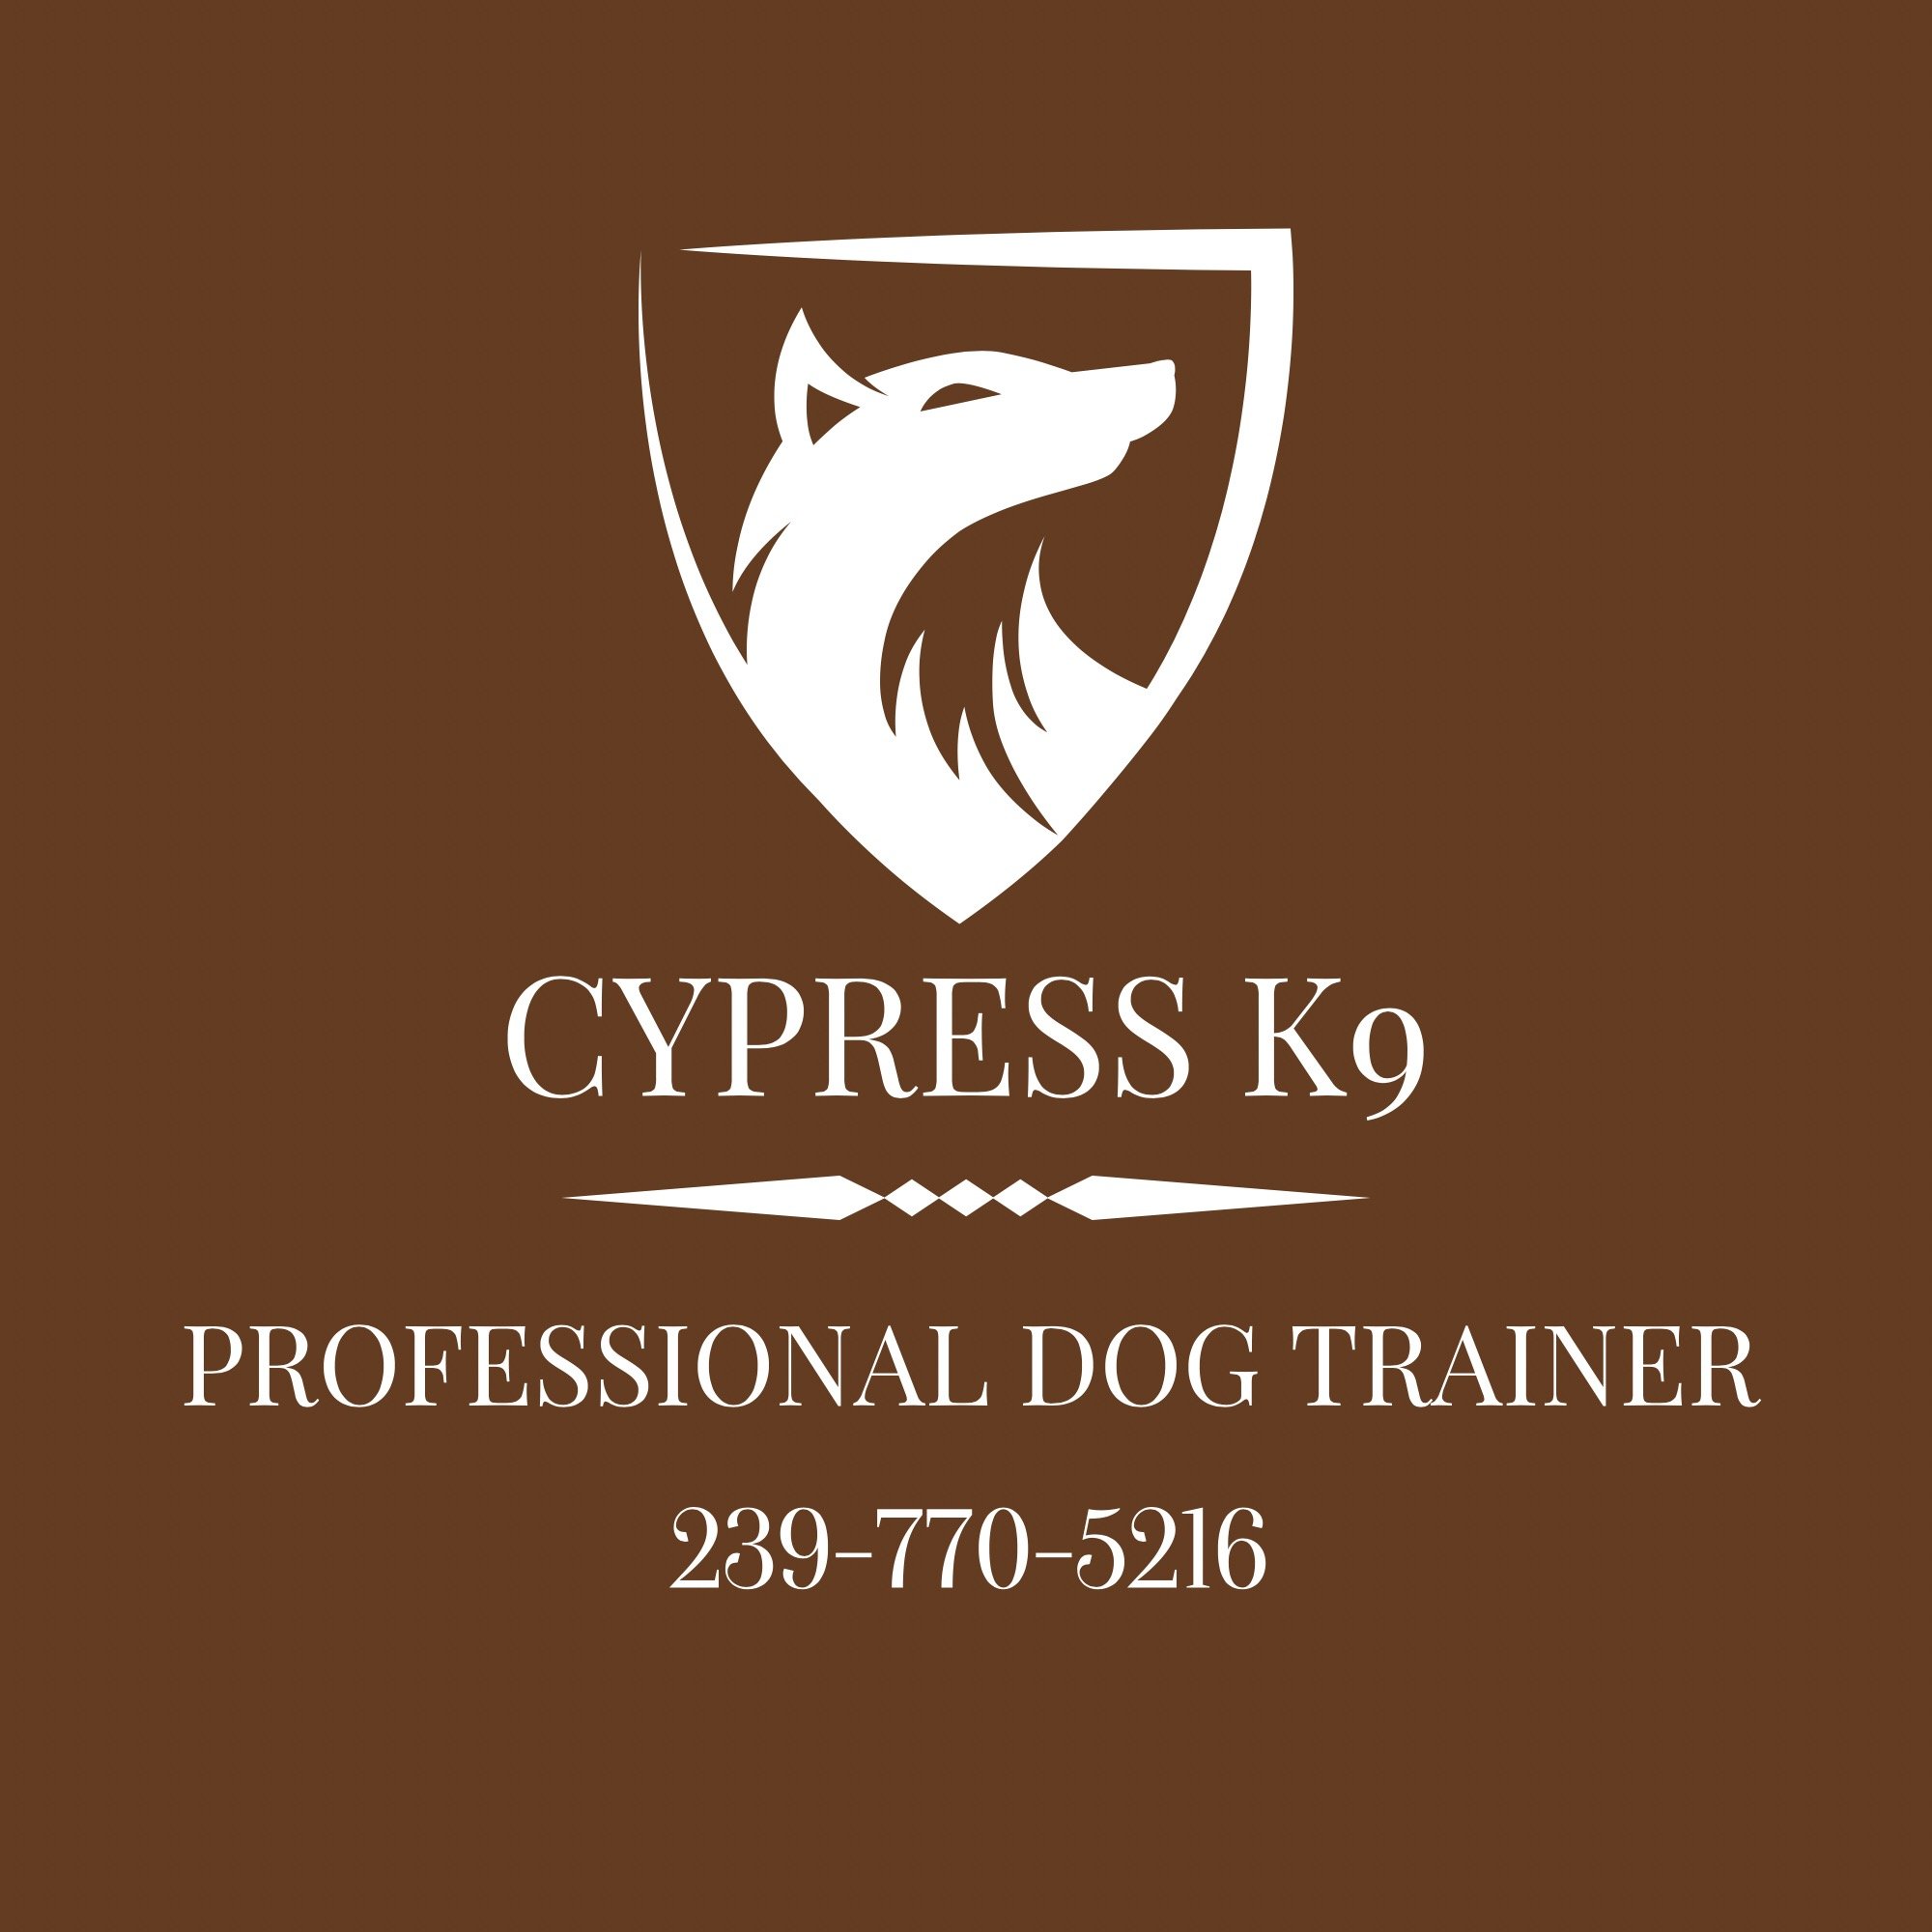 My goal as a professional trainer is to work with you to gain a clear understanding of what you are needing from your dog.